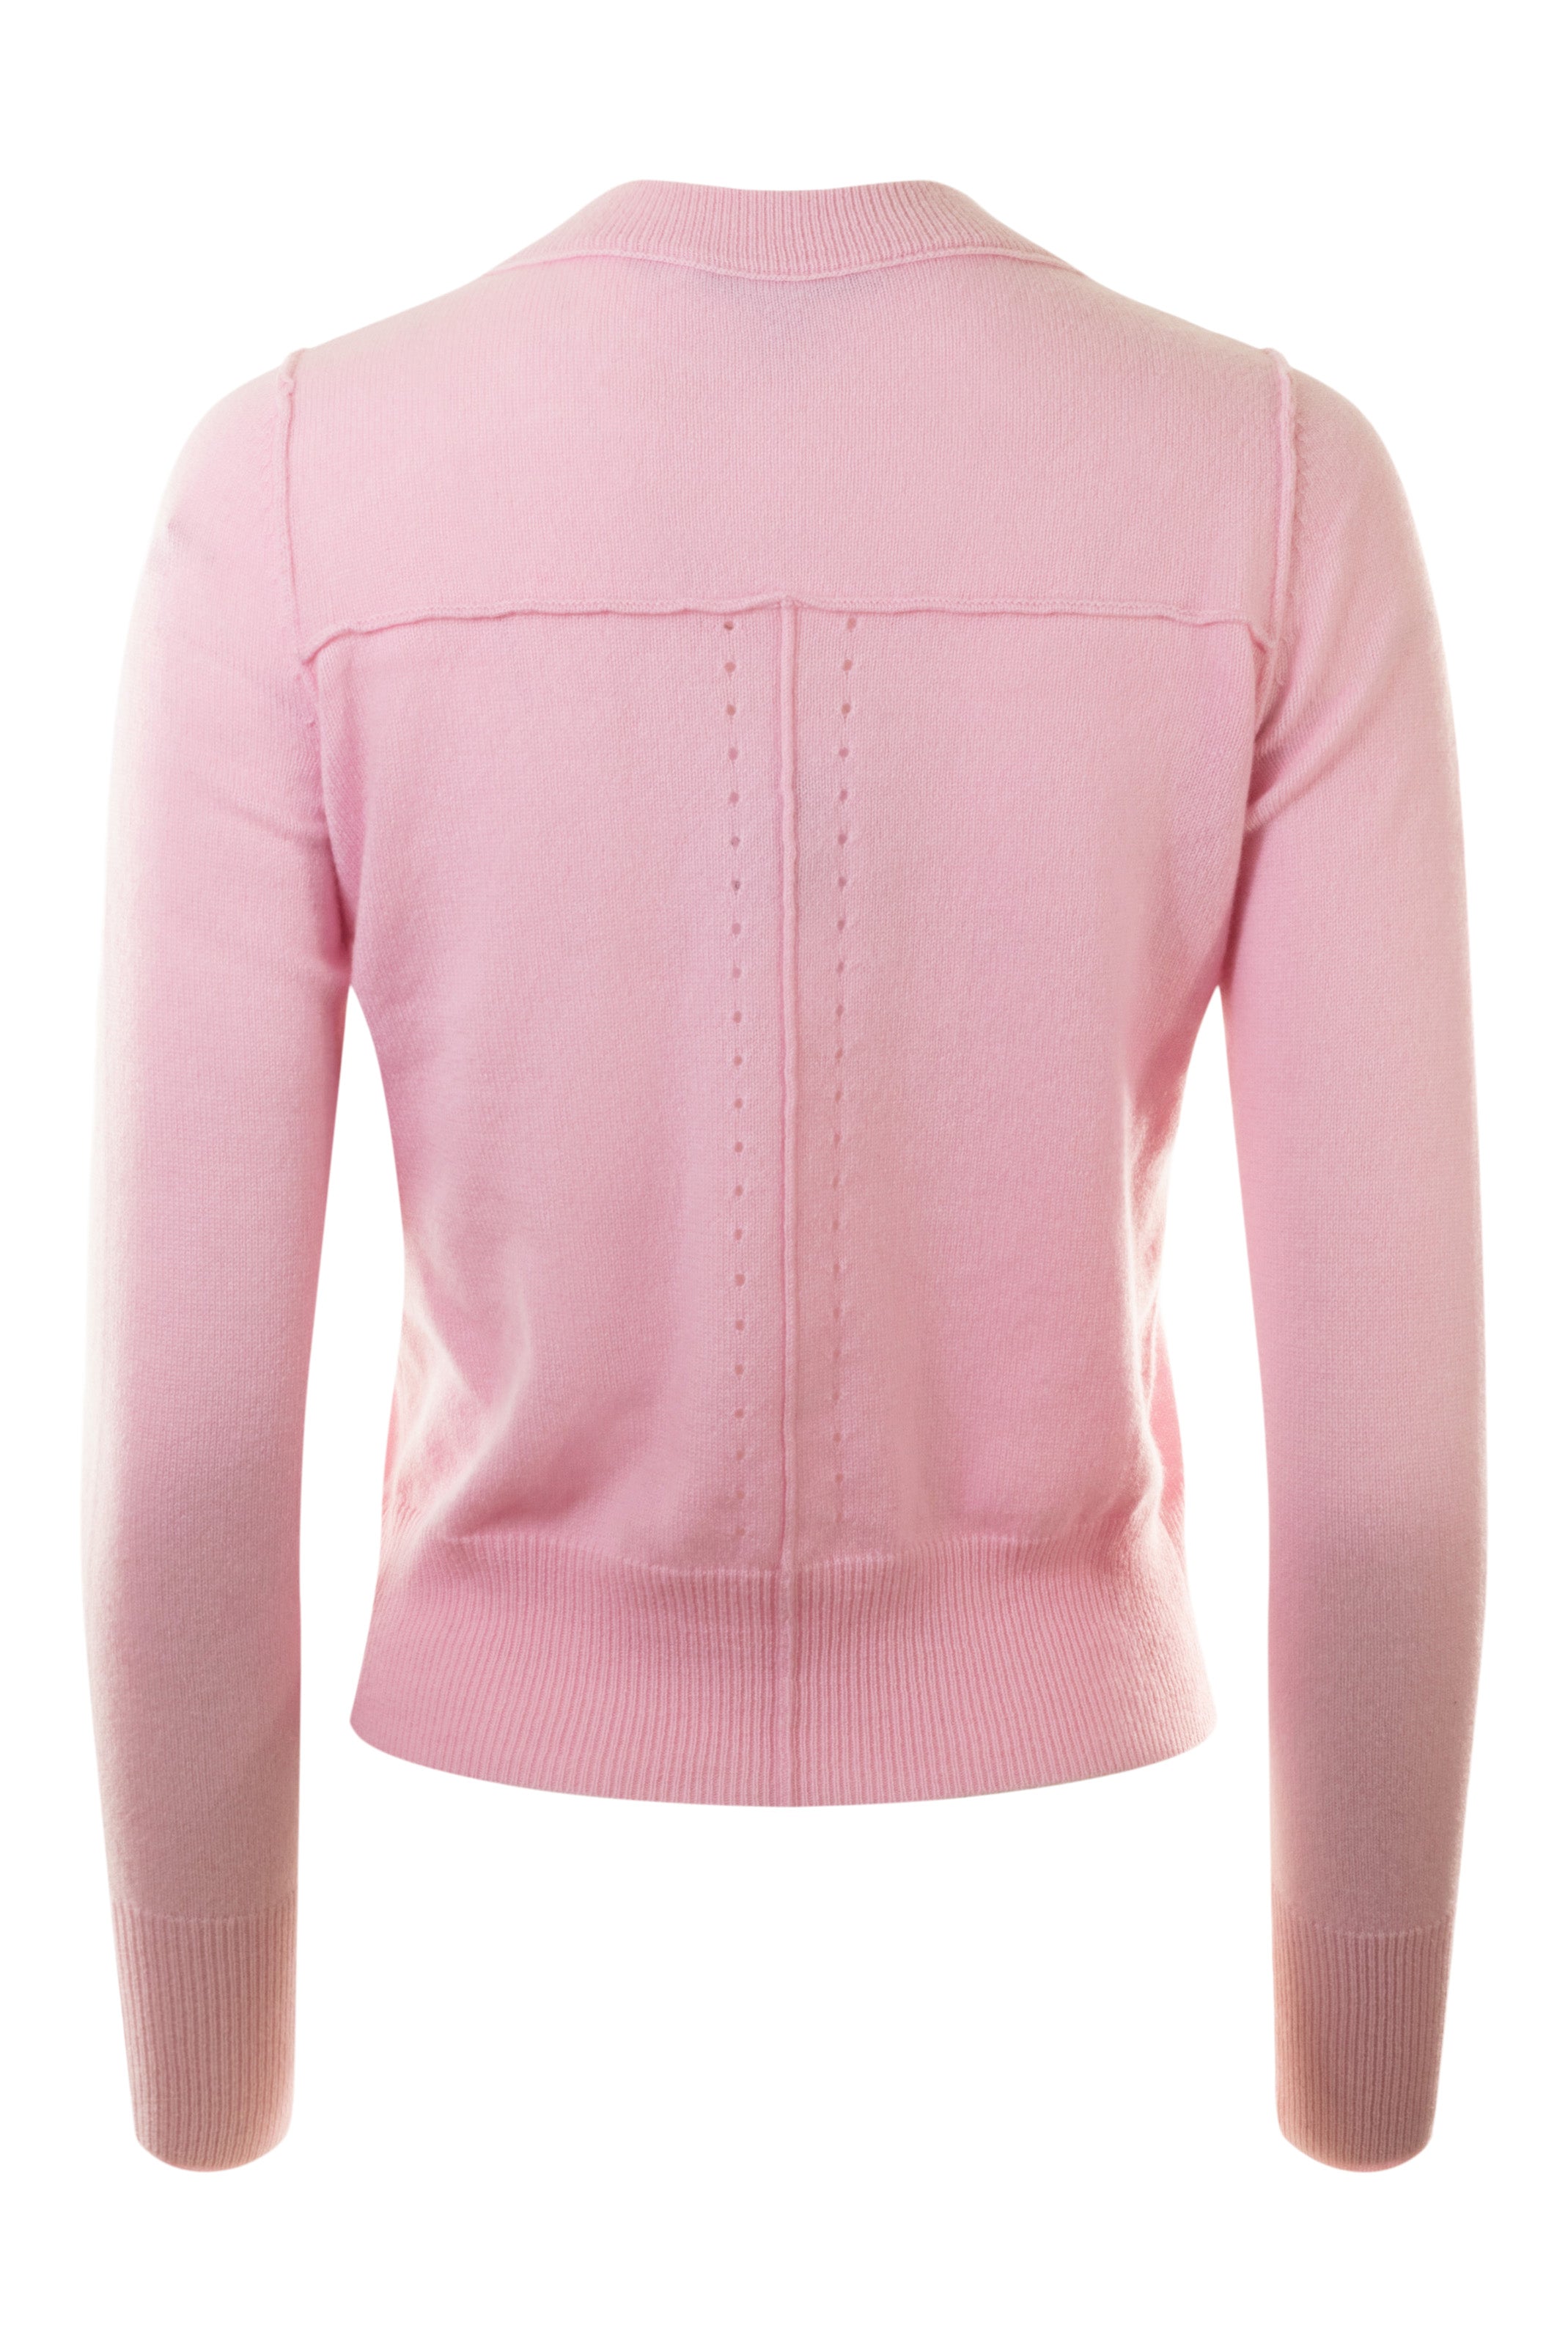 Autumn Cashmere Cropped Crew with Reversed Seams
 in Peppermint